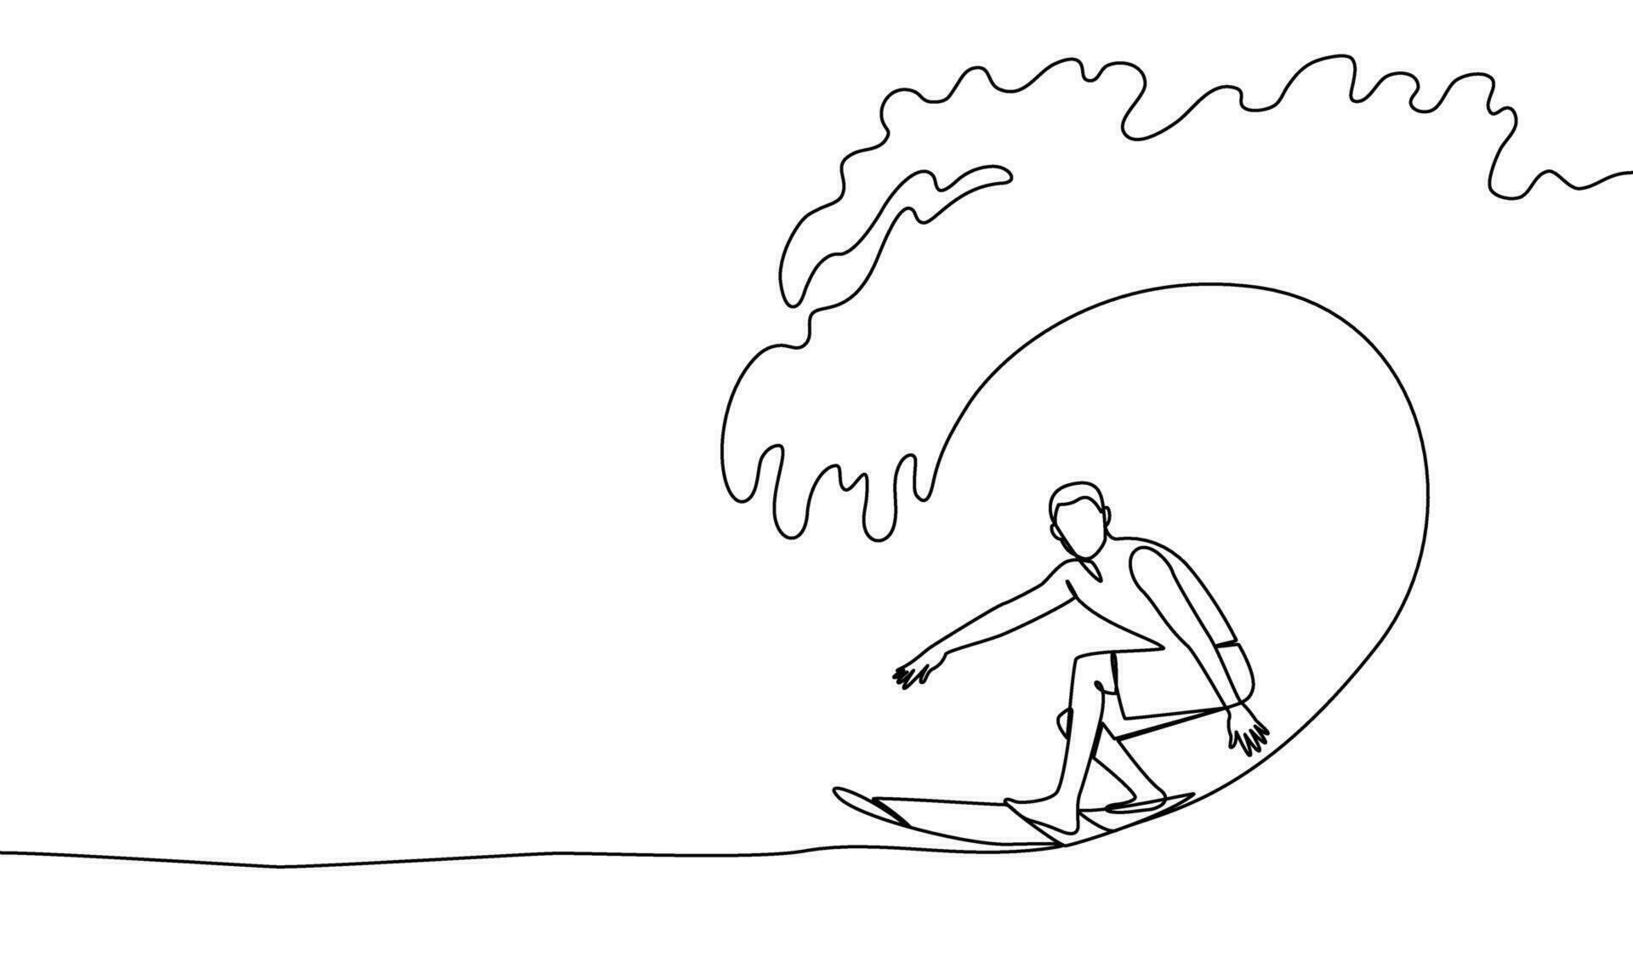 Single continuous line of professional surfer on the ocean wave. Surfing. Water, wave, catch a wave. One line drawing vector illustration